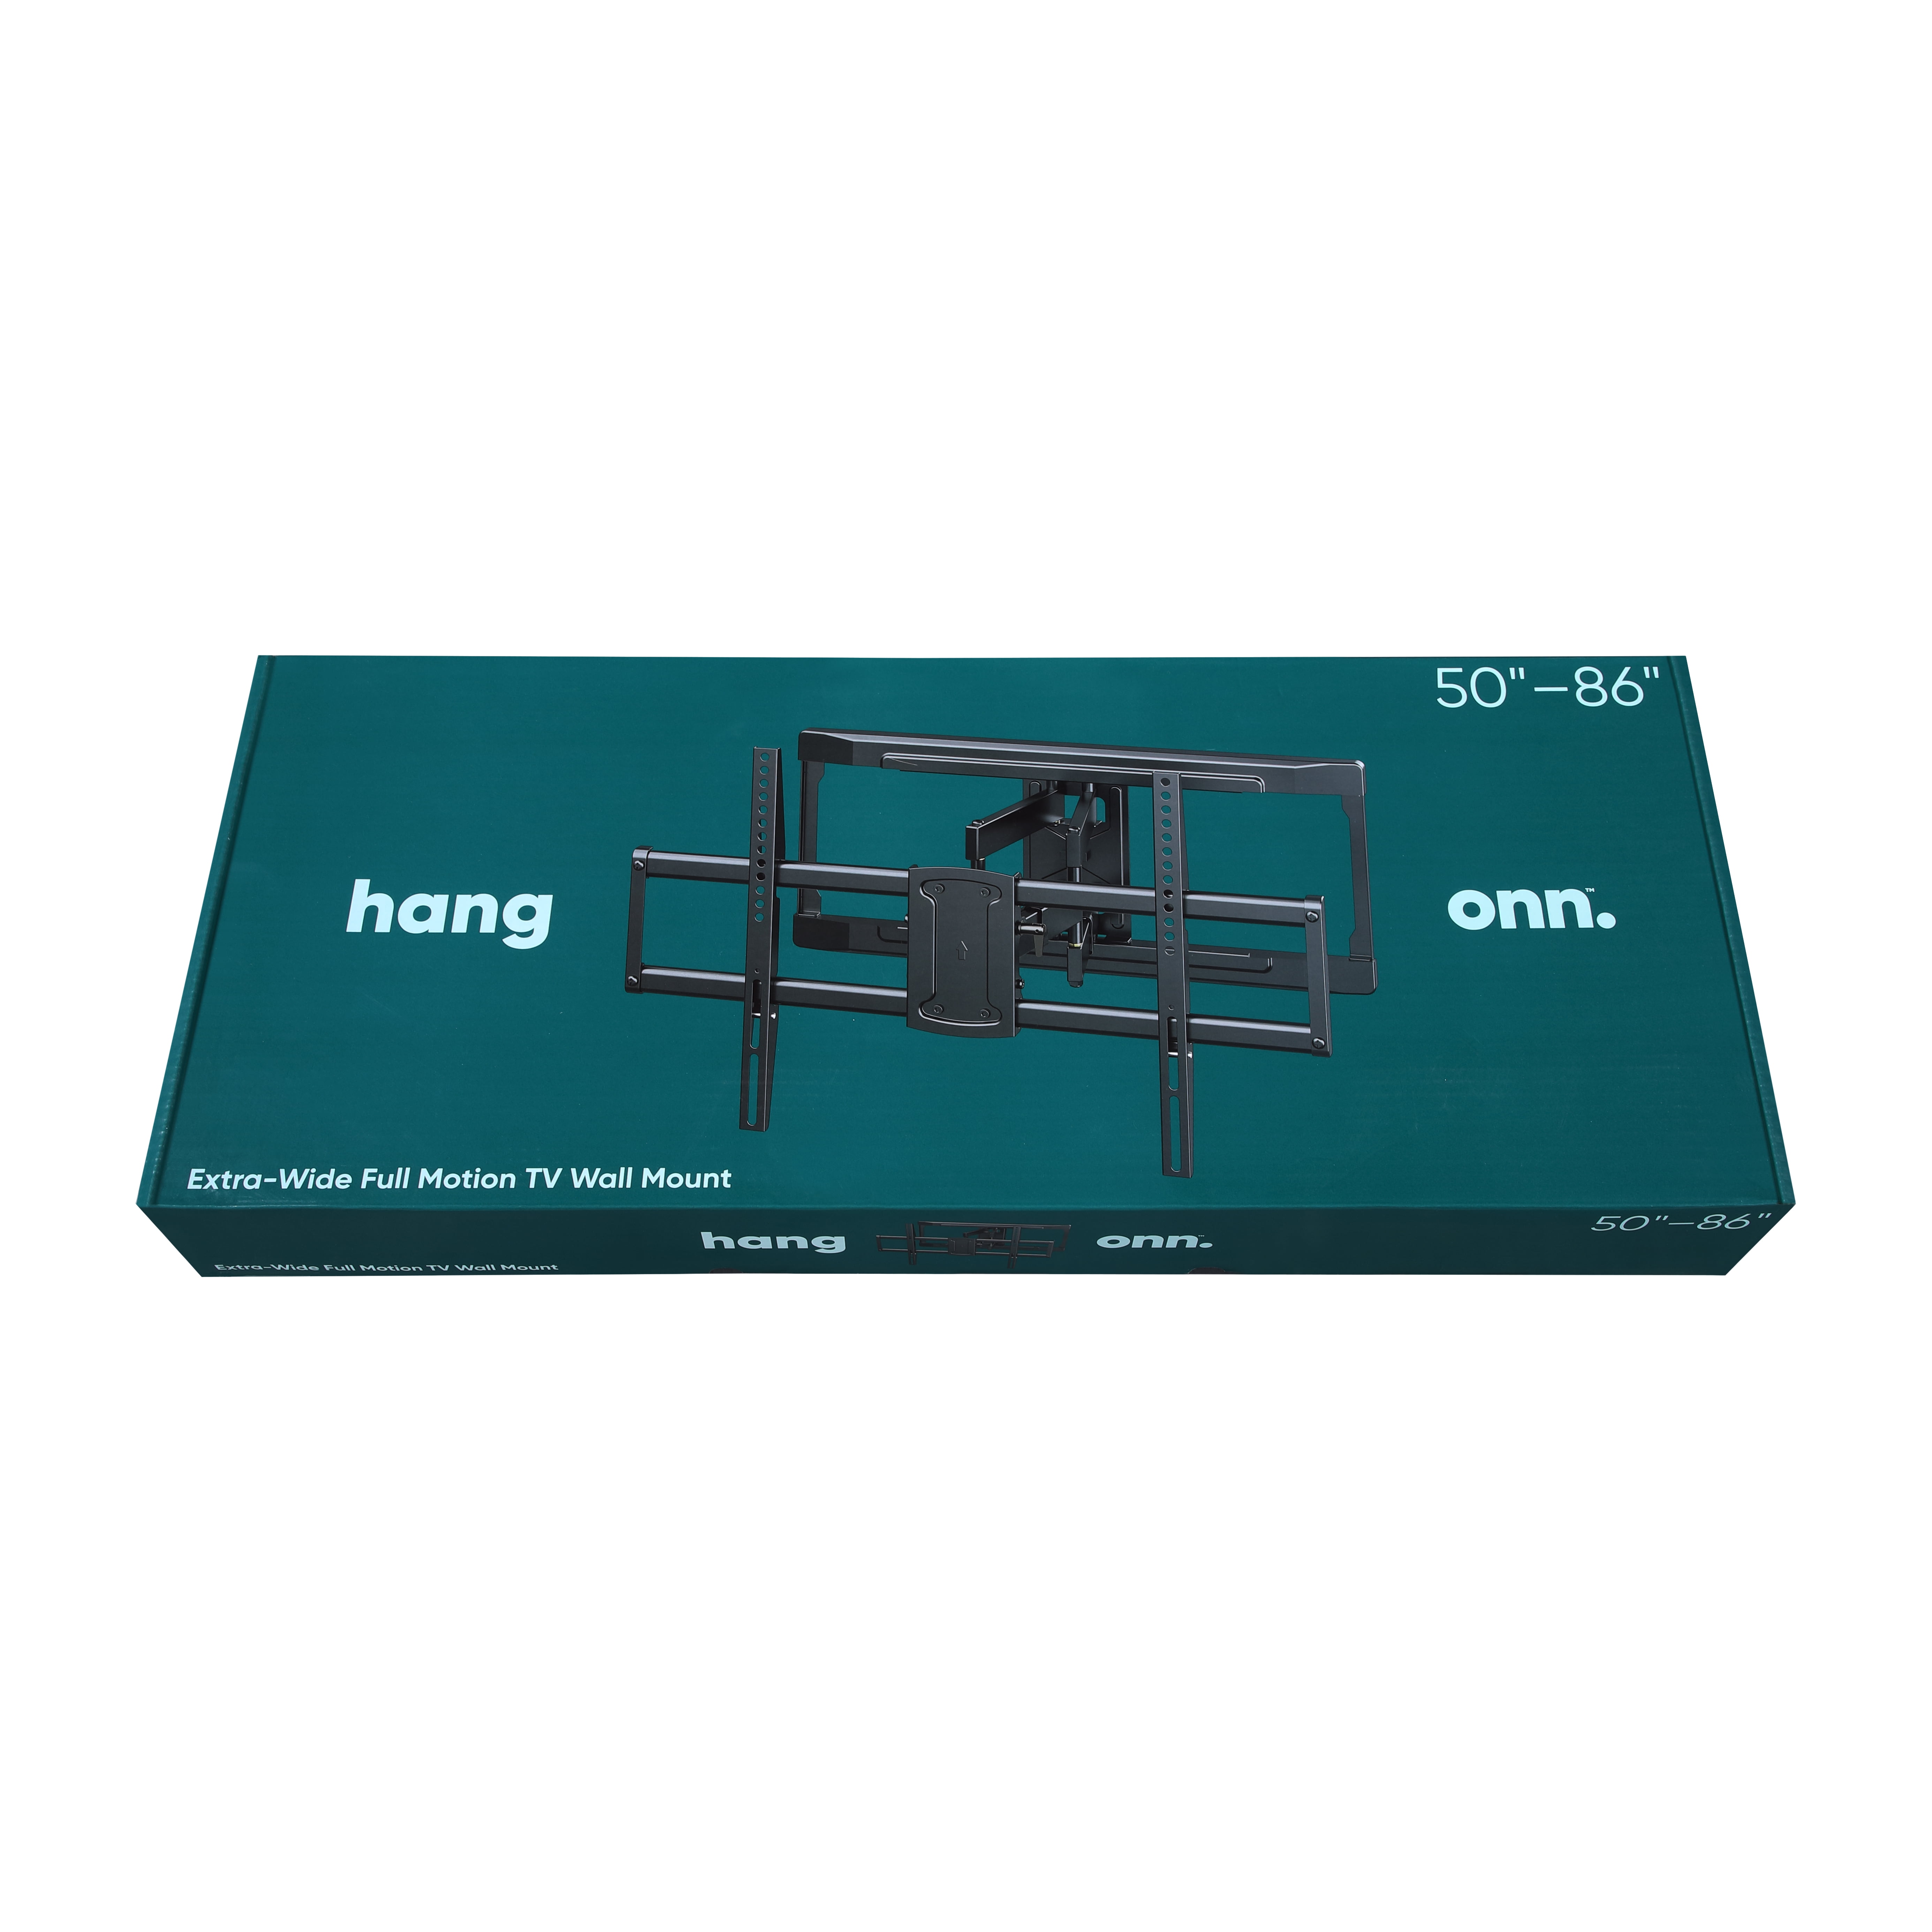 onn. Full Motion TV Wall Mount for 50 to 86 TVs, up to 15